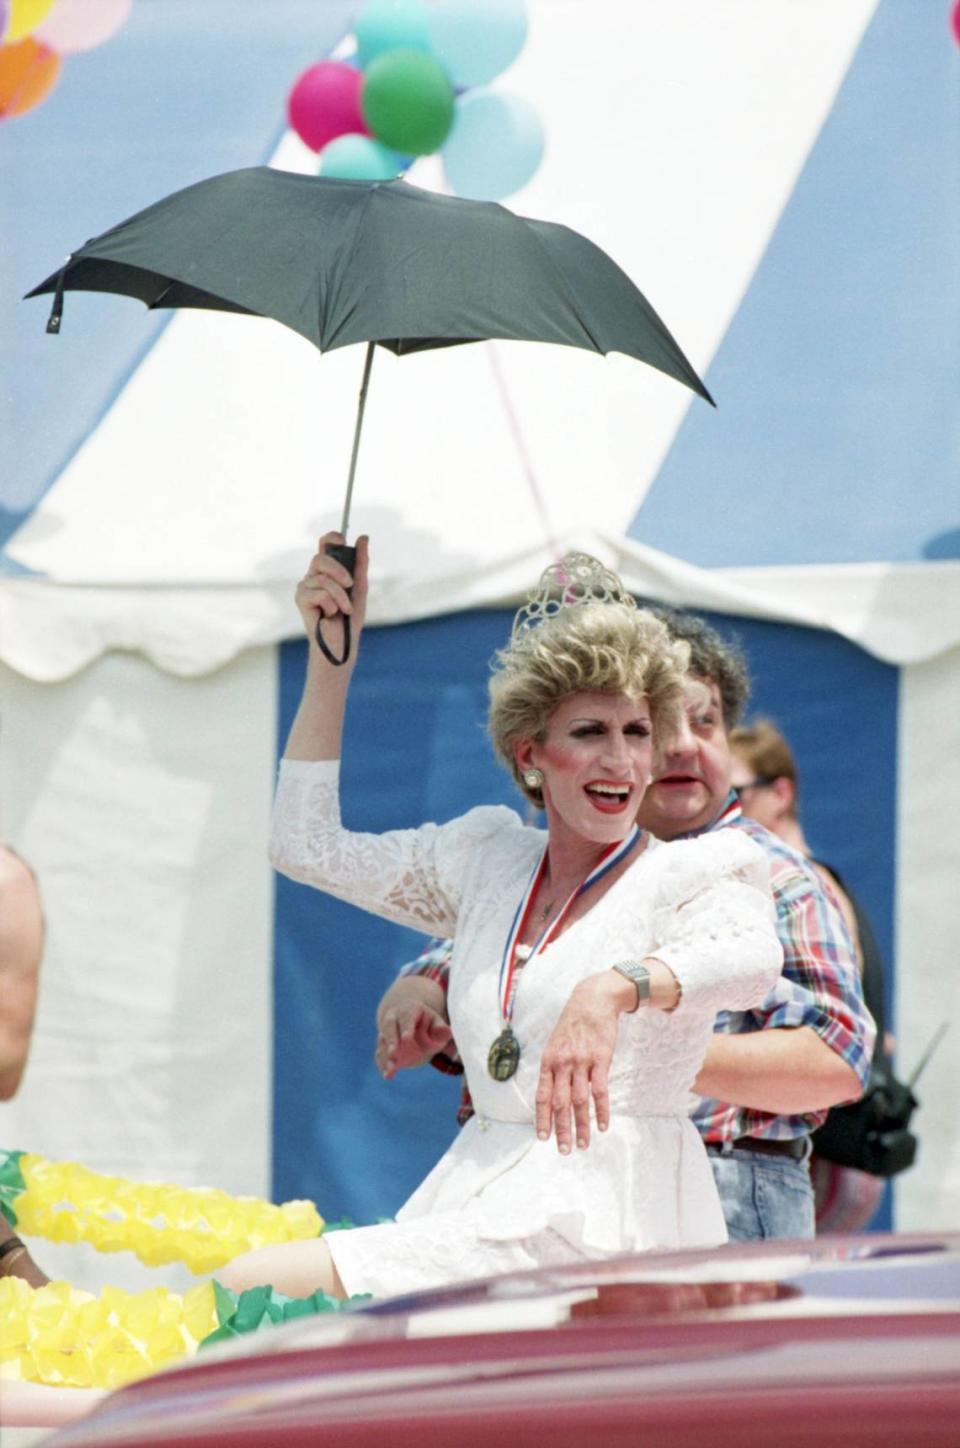 Grand marshals Jerry “Big Mama” Cassidy, right, and drag queen Raina Lea (Gary Taylor), carrying an umbrella, ride in a pink 1958 Lincoln Continental convertible during the 1990 Gay Pride Week parade held in Fort Worth.